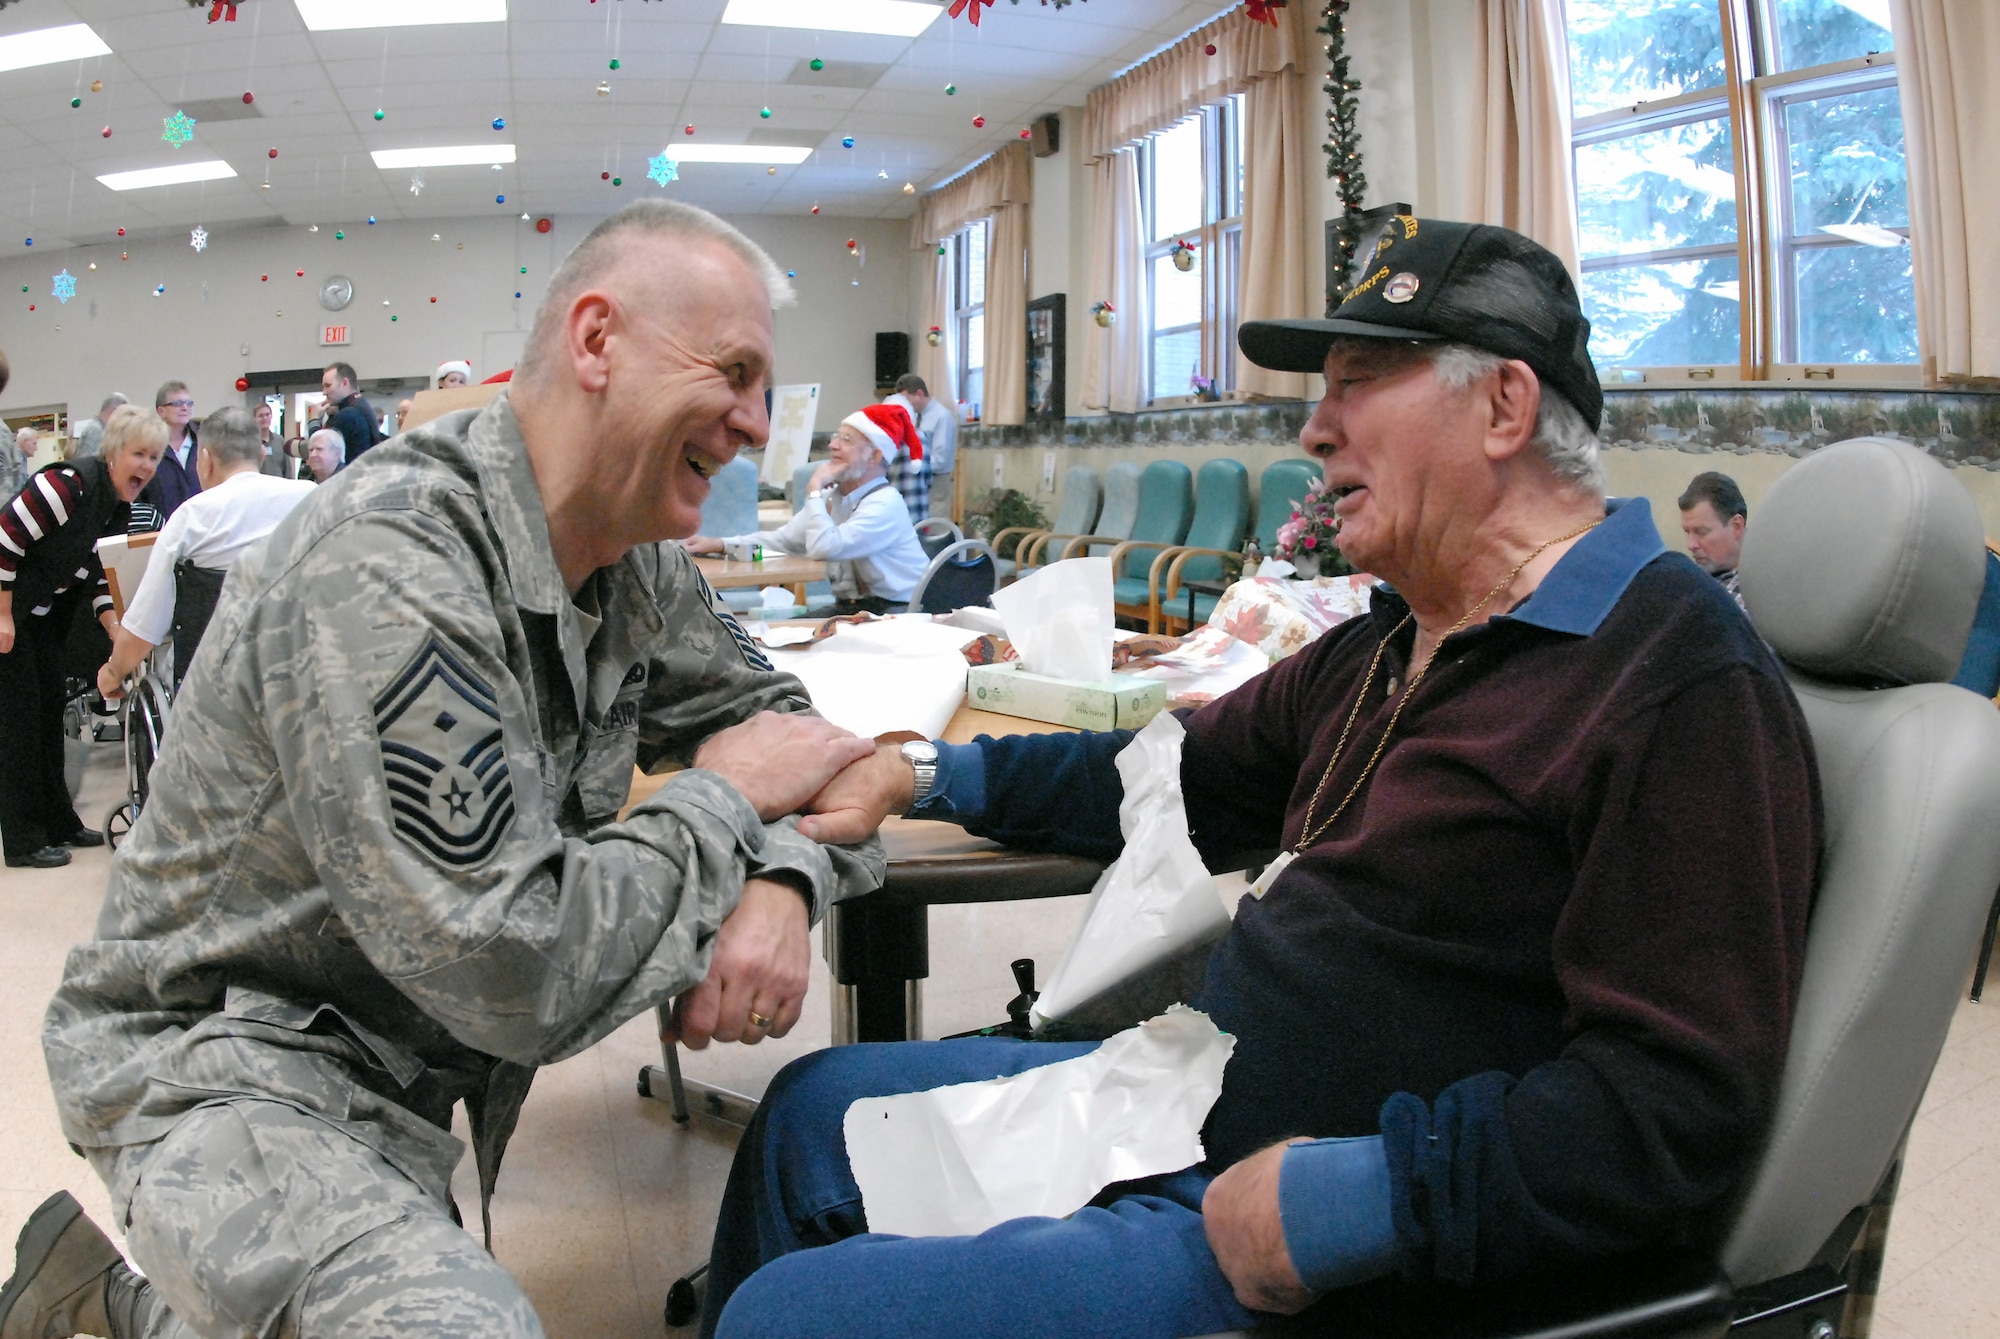 Senior Master Sgt. Paul Tangen visits with Marine veteran Marvin Schiermeister at the North Dakota Veteran's Nursing Home Dec. 10 in Lisbon, N.D. The gifts are given to veterans at the nursing home by the North Dakota Air and Army National Guard each December using funds raised through personal donations given by the North Dakota National Guard members. Sergeant Tangen is the the 119th Wing first sergeant. (U.S. Air Force photo/Senior Master Sgt. David H. Lipp)